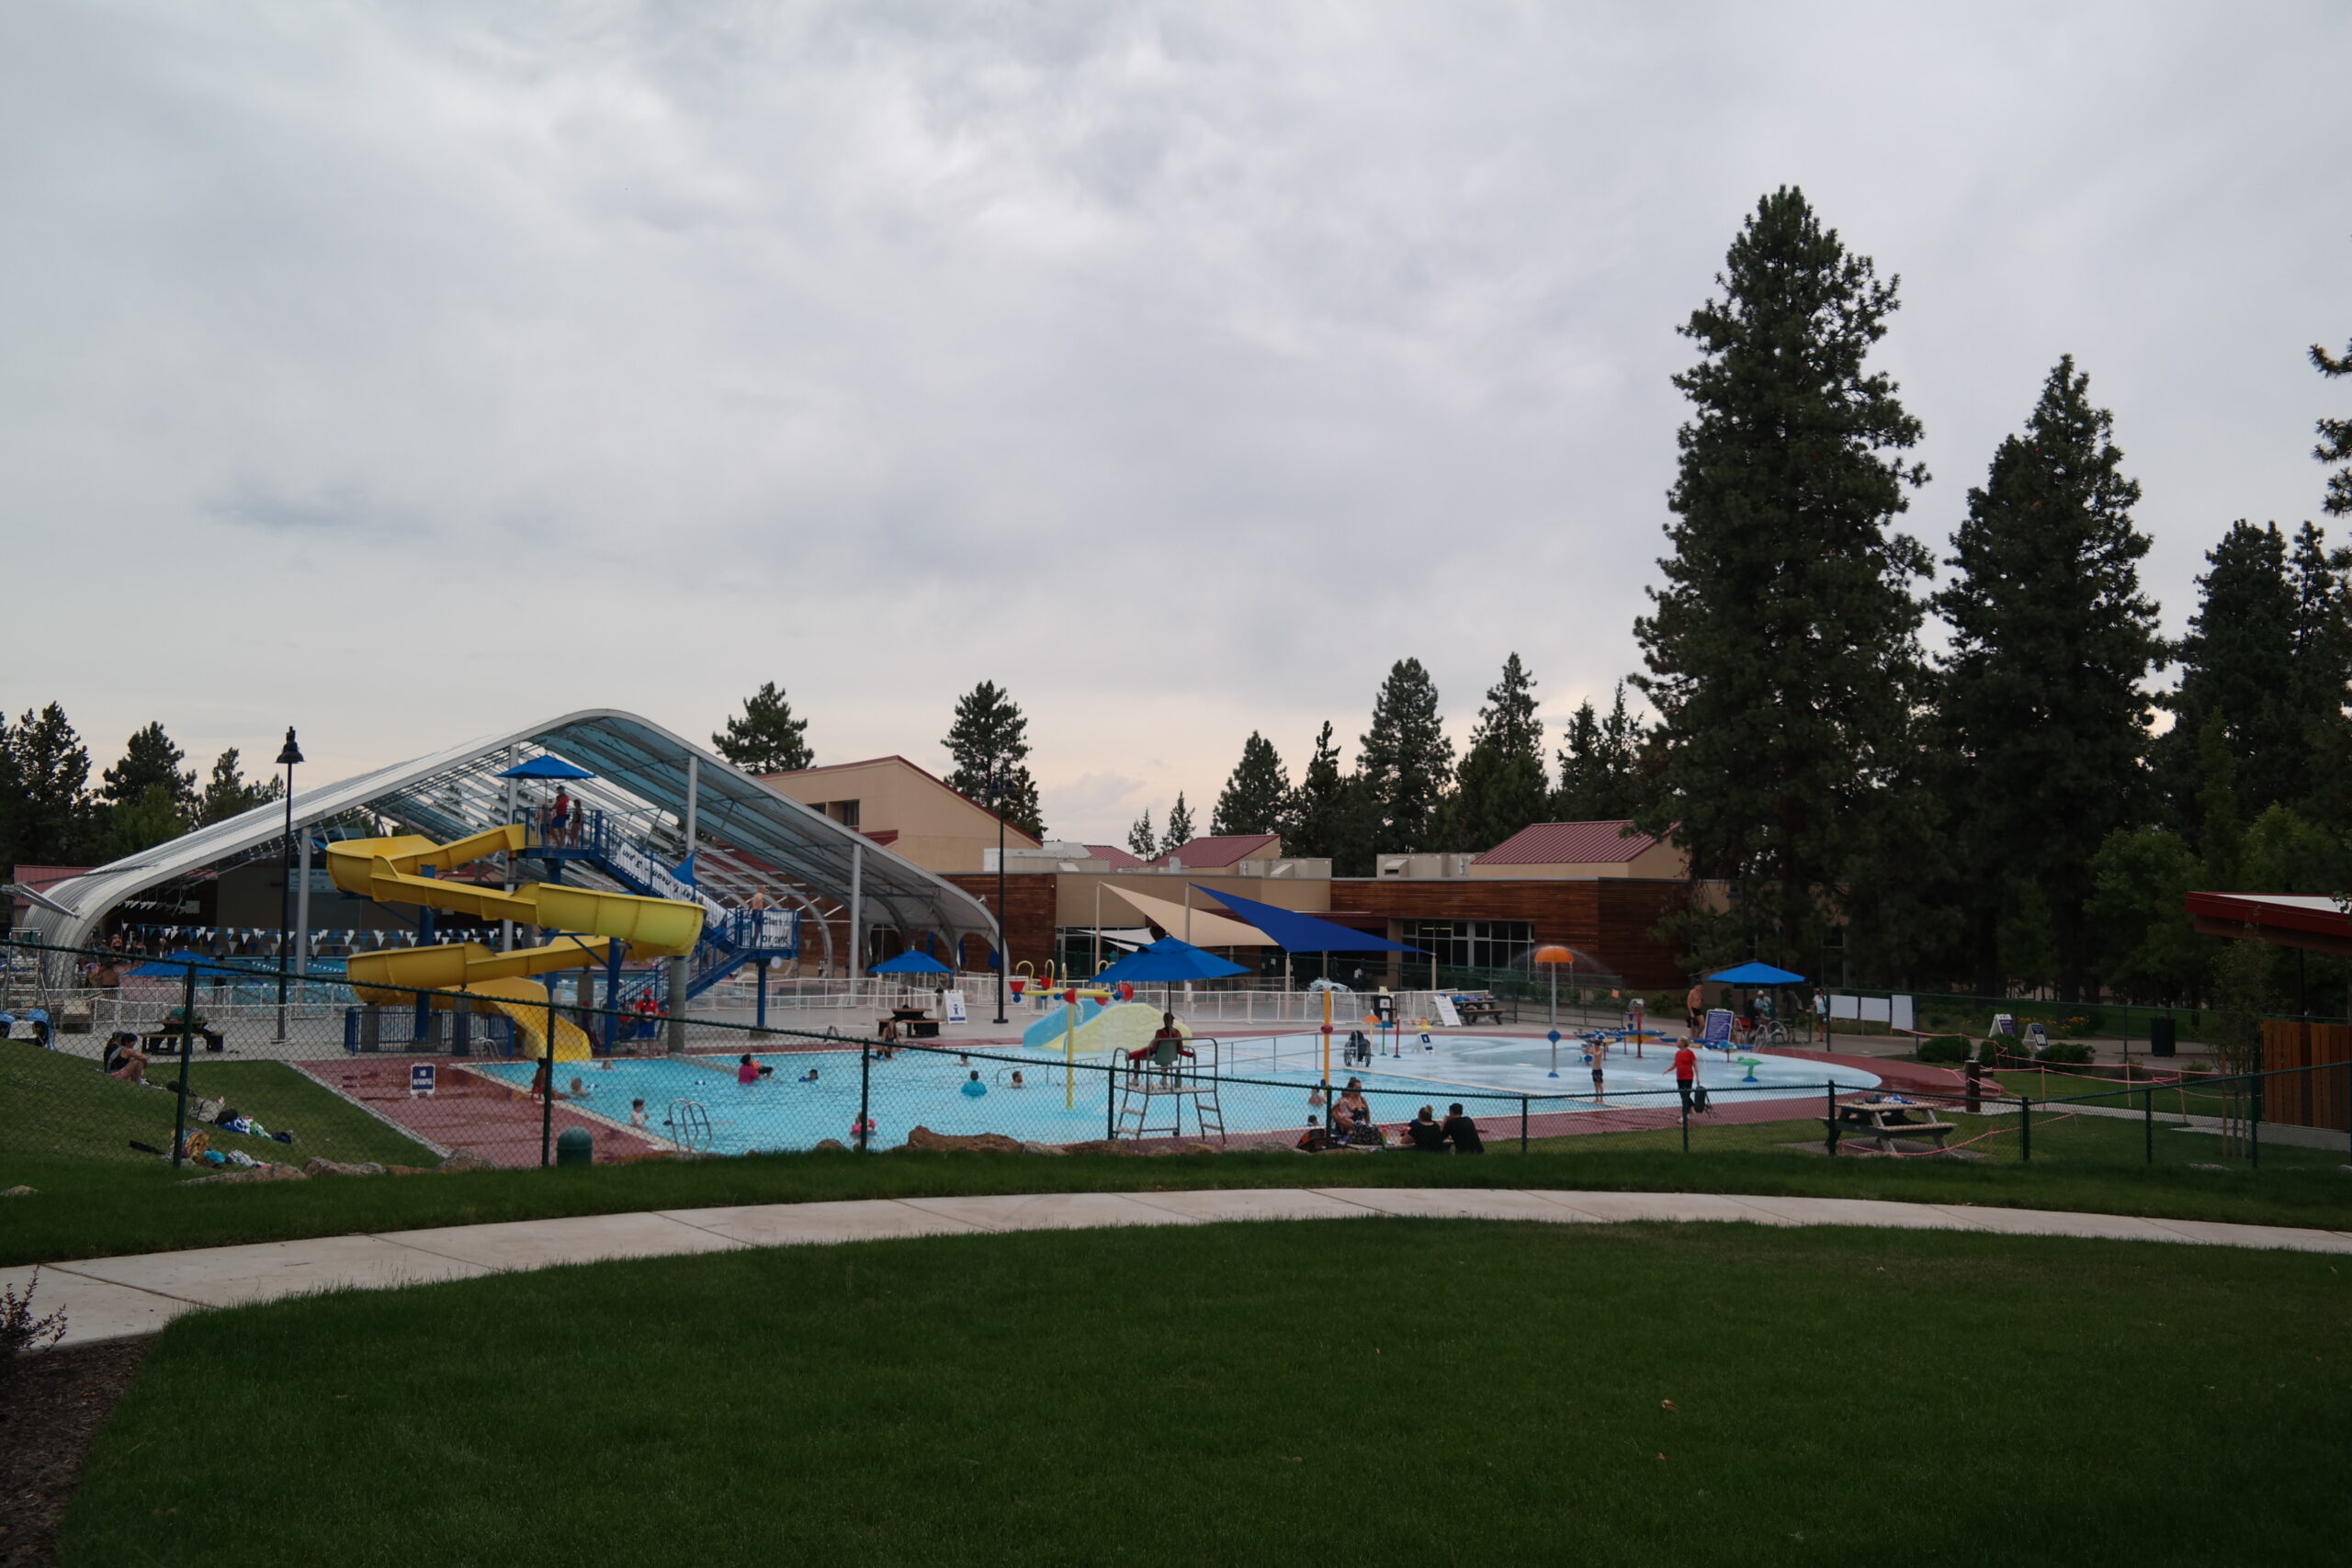 The outdoor activity pool at Juniper from a distance